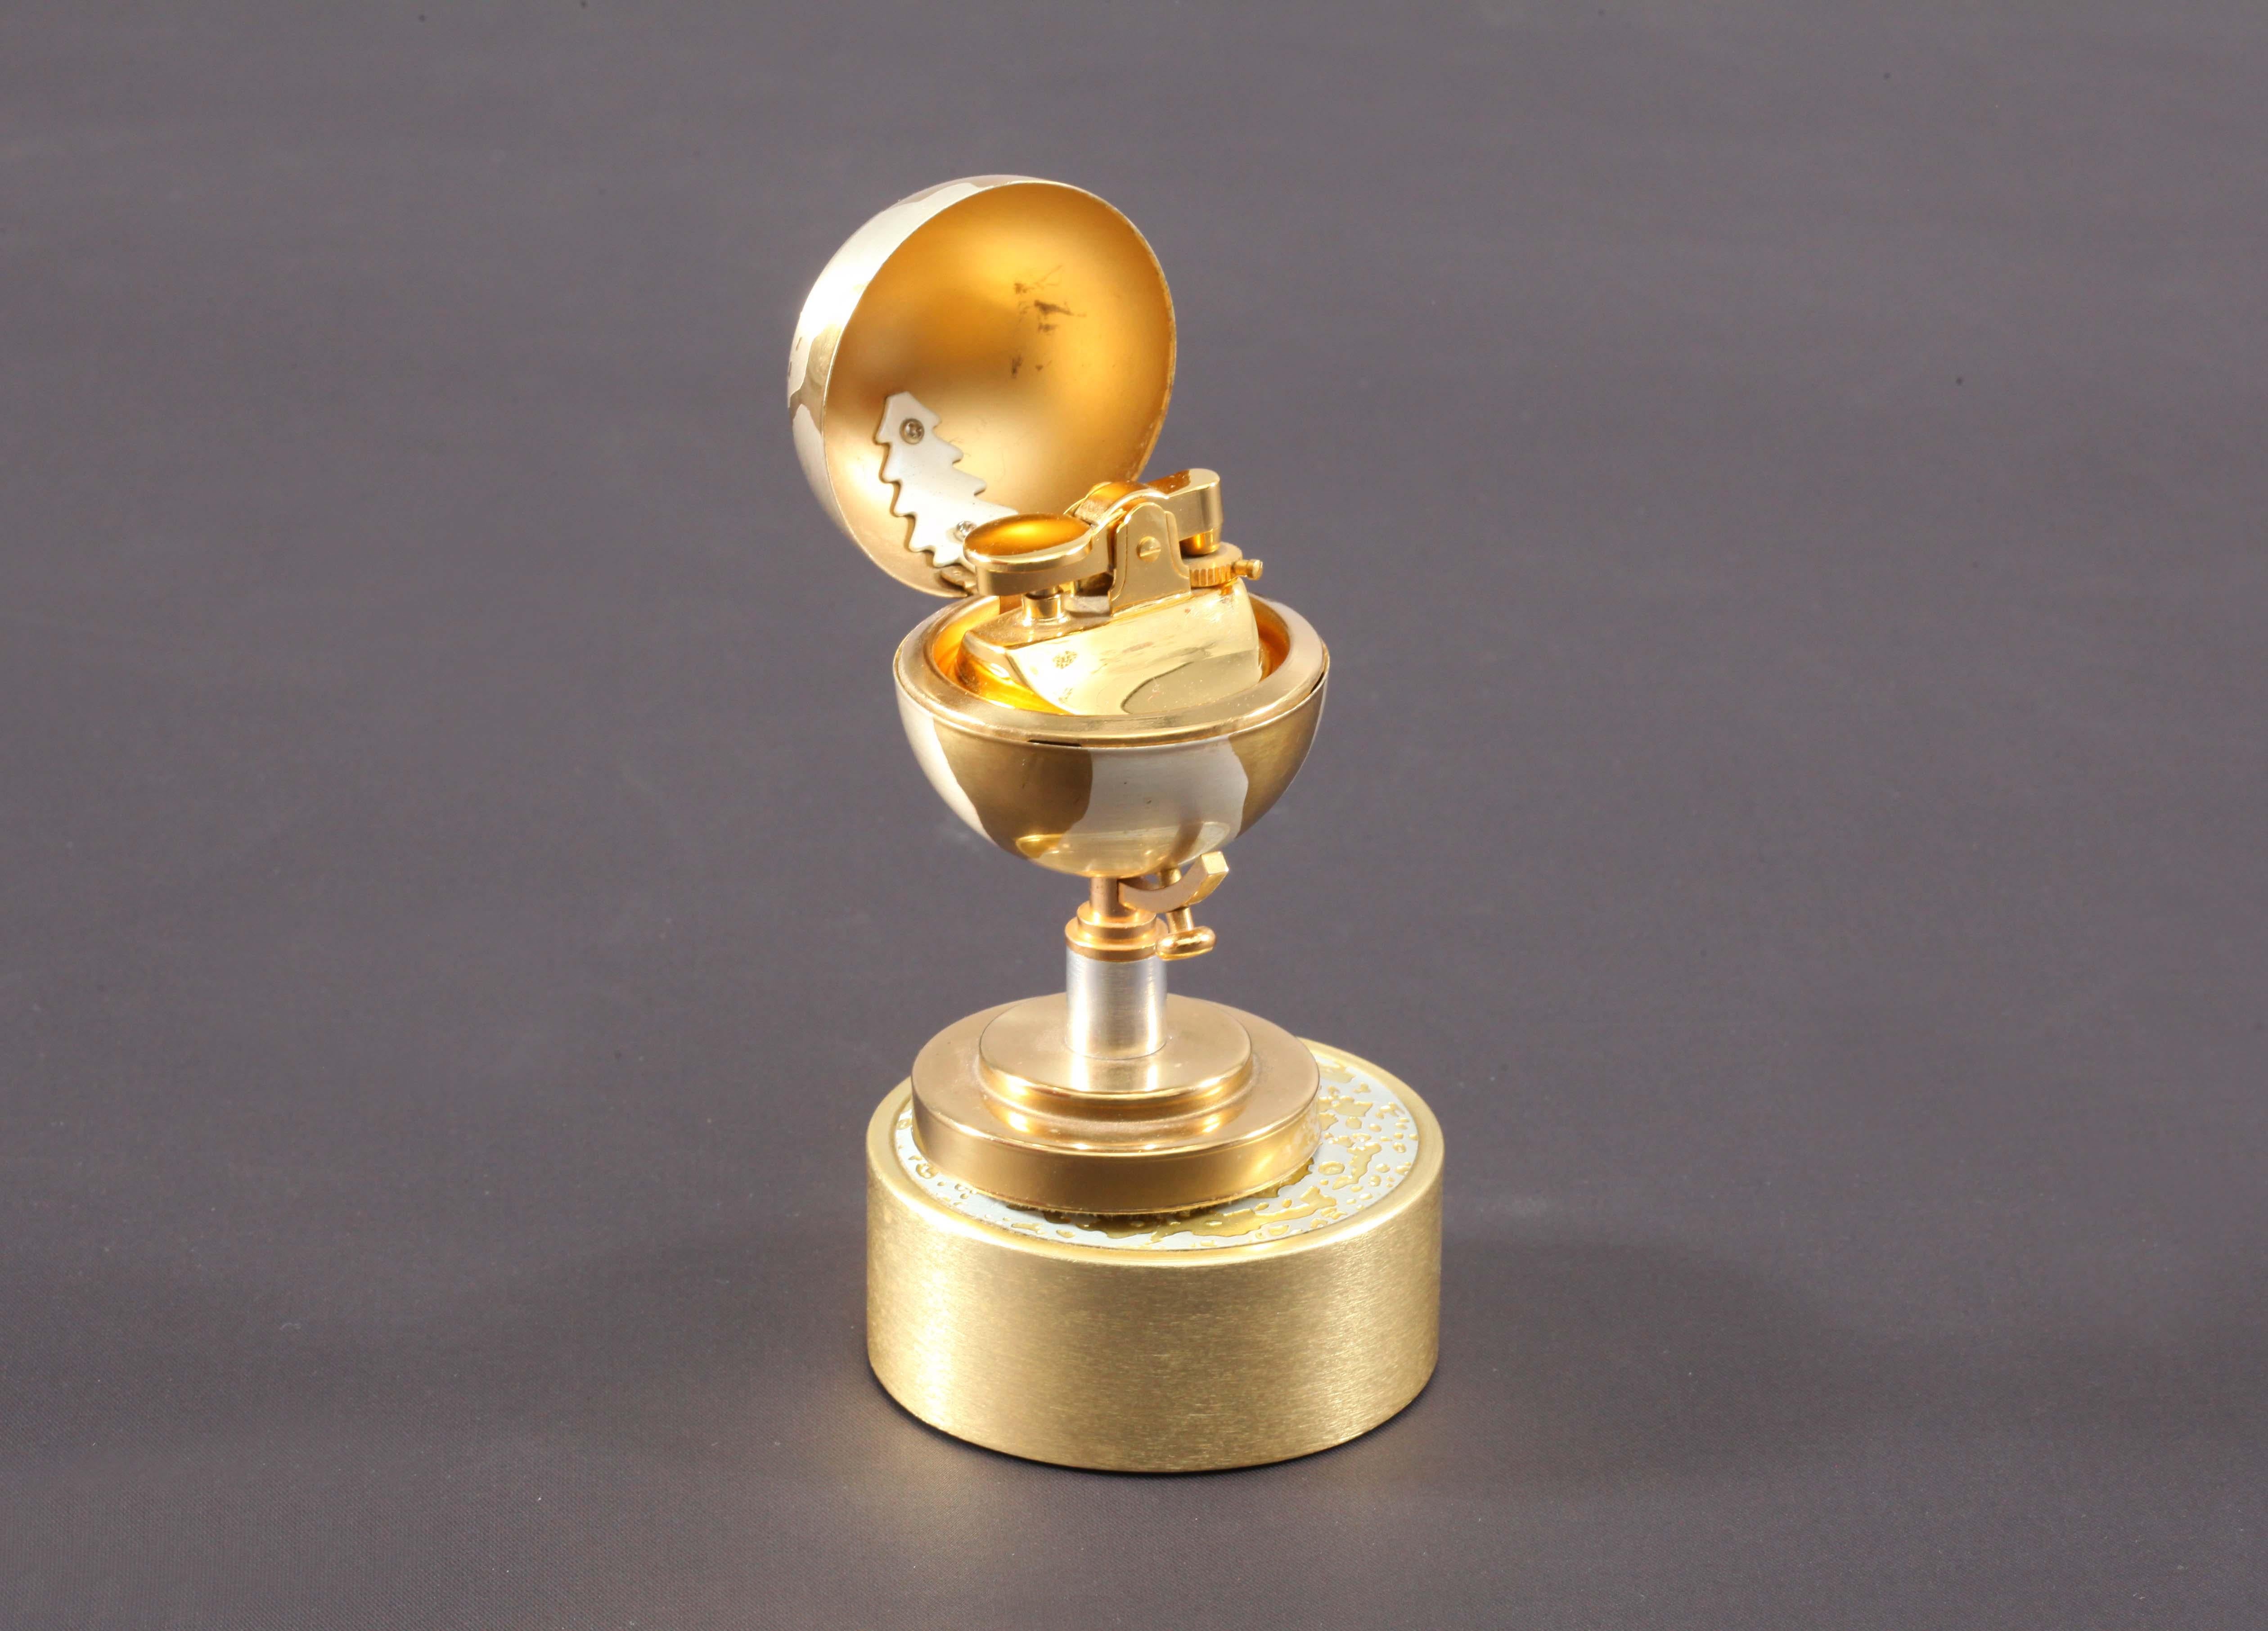 Vintage gold colored metal Colibri table lighter in the form of a World Globe on a stand. The item is music box & the globe revolves as music played. Dates from circa 1950s. The lighter look's in nice used condition, spark wheel works well.